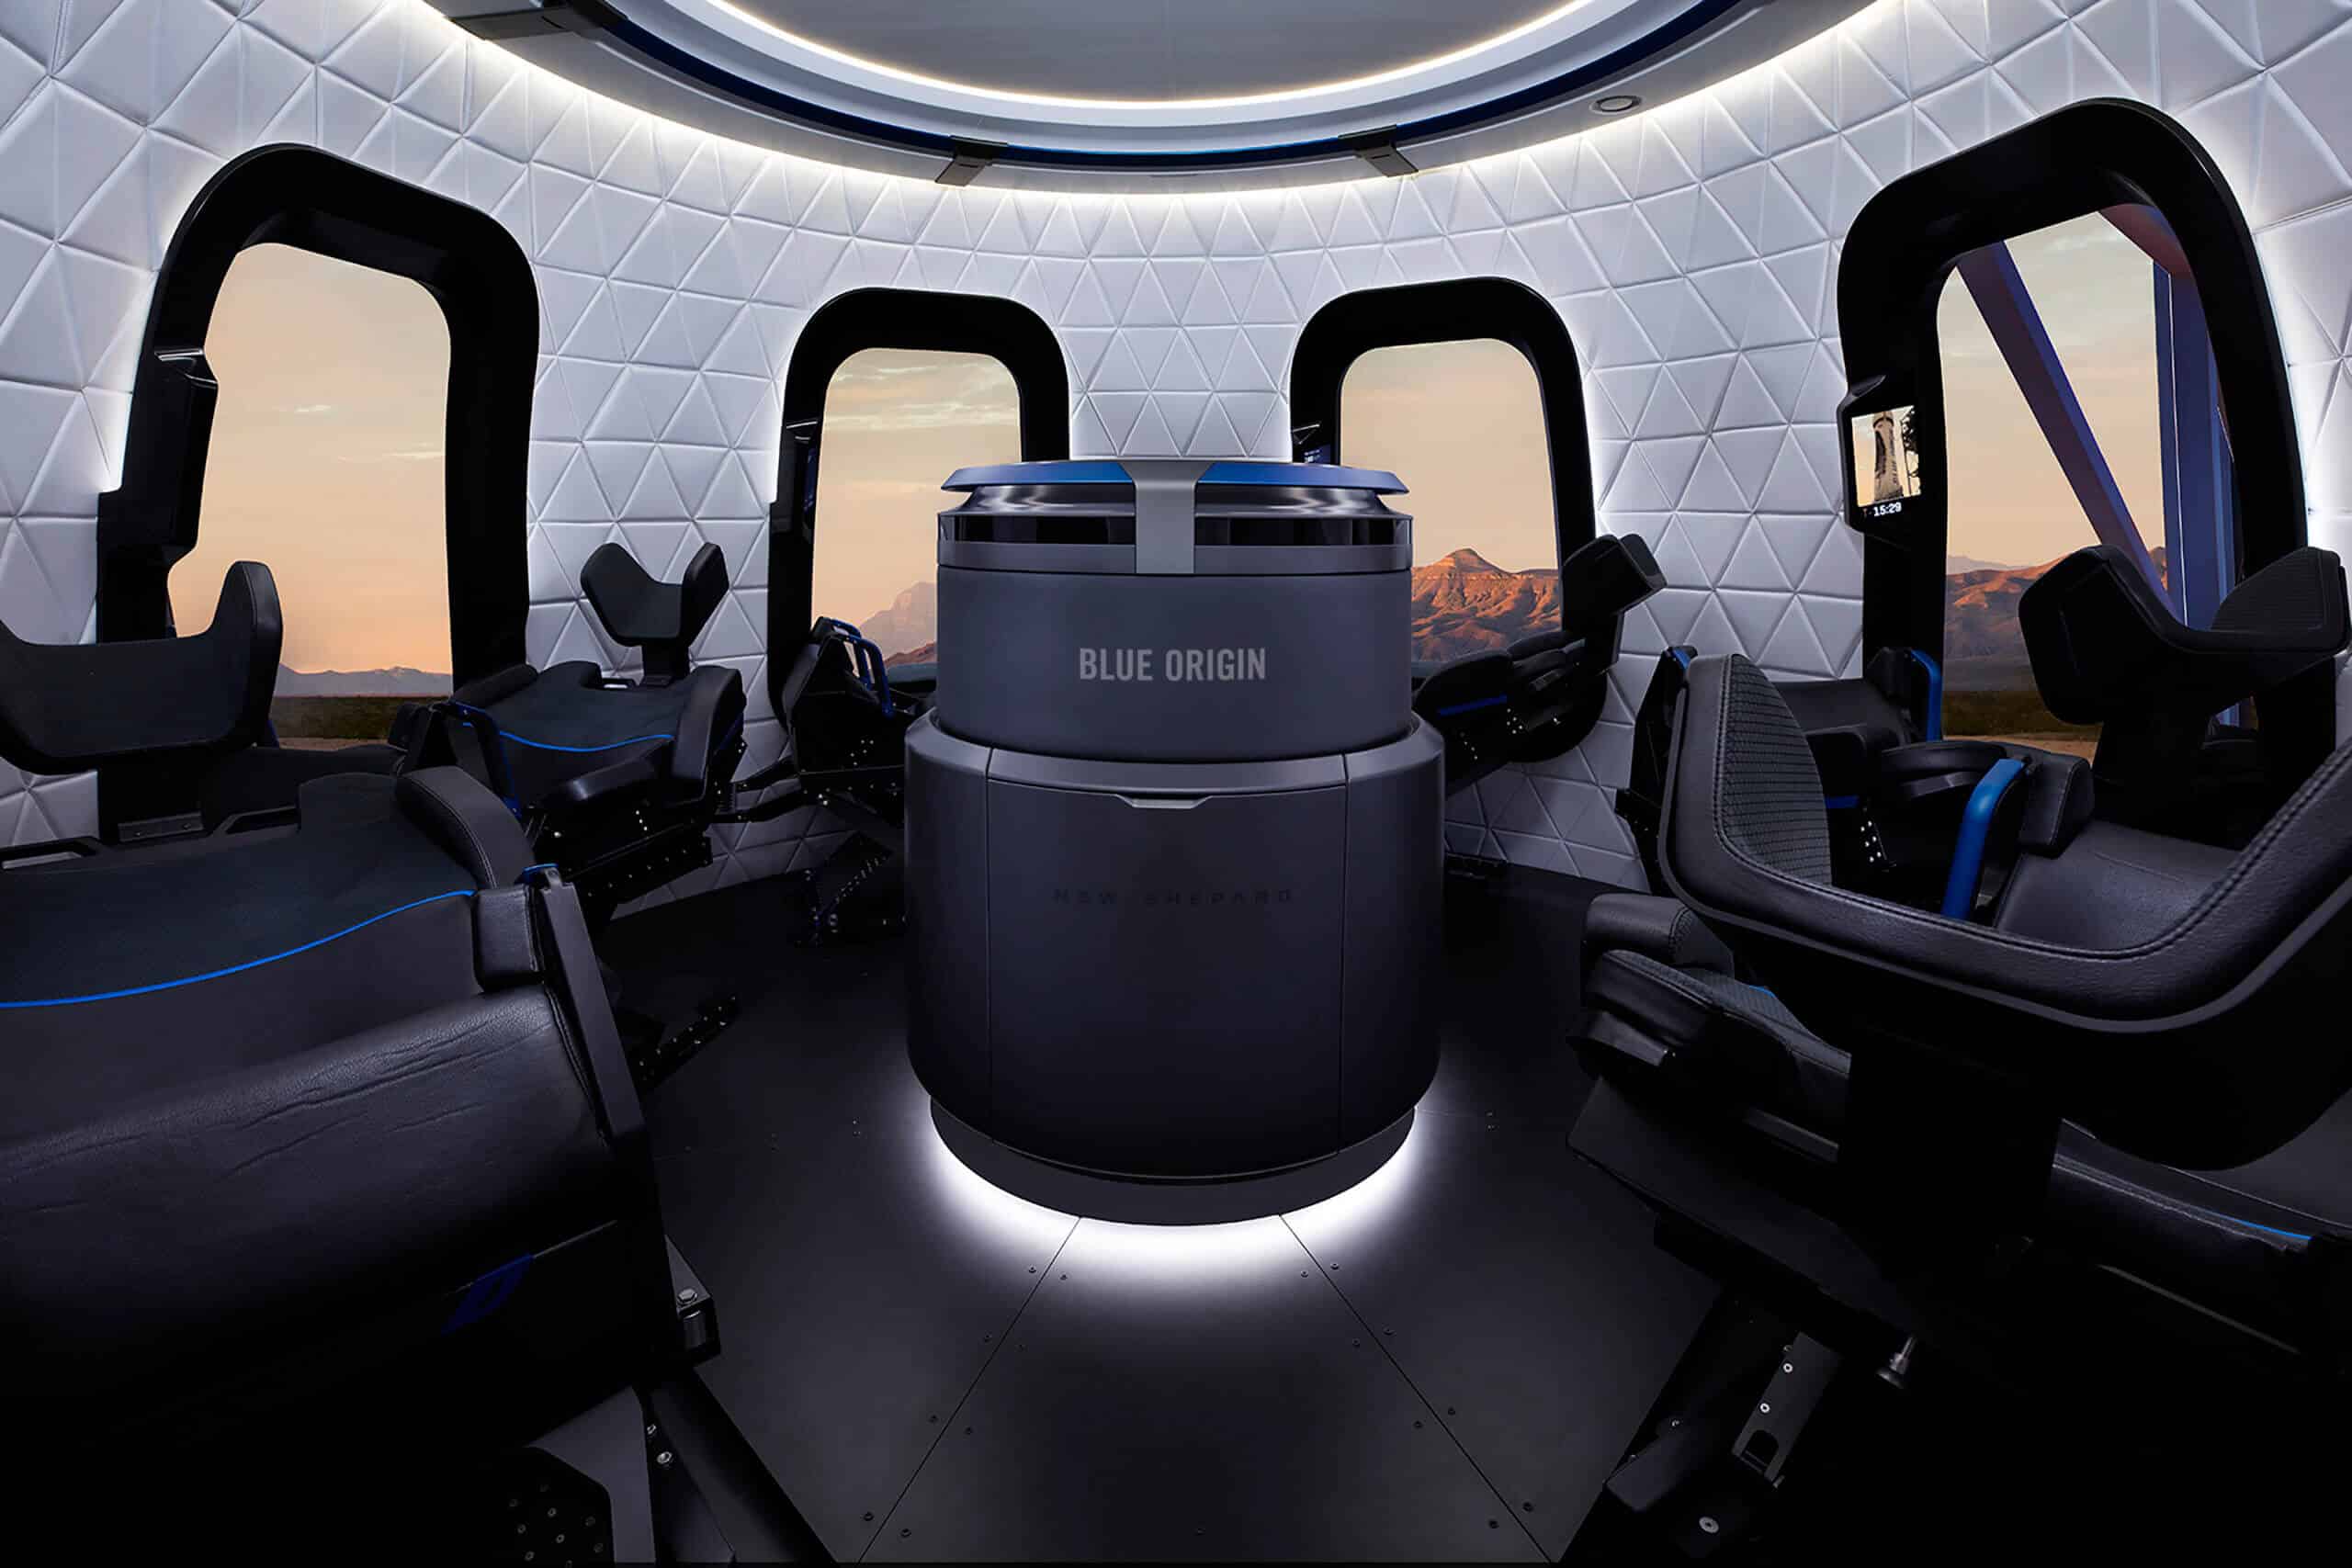 With room for six astronauts, the spacious and compact crew capsule is comfortably furnished and each passenger gets their own window seat. PR photo, Blue Origin